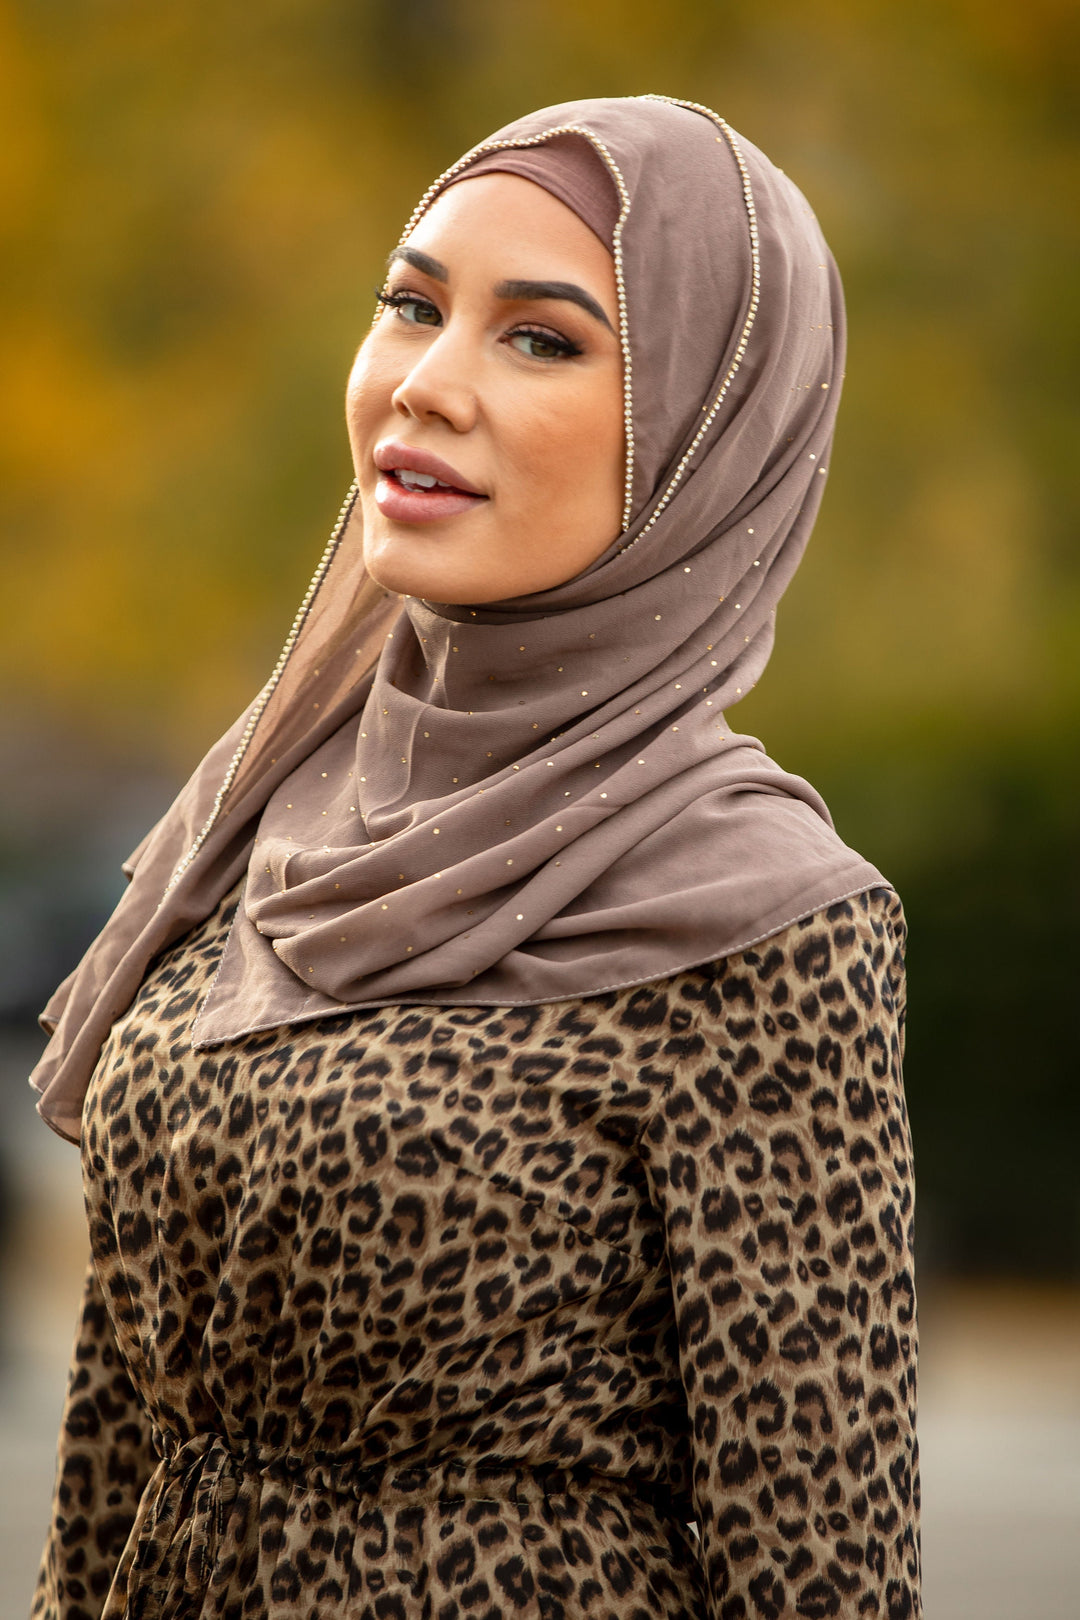 a woman in a leopard print dress and a headscarf